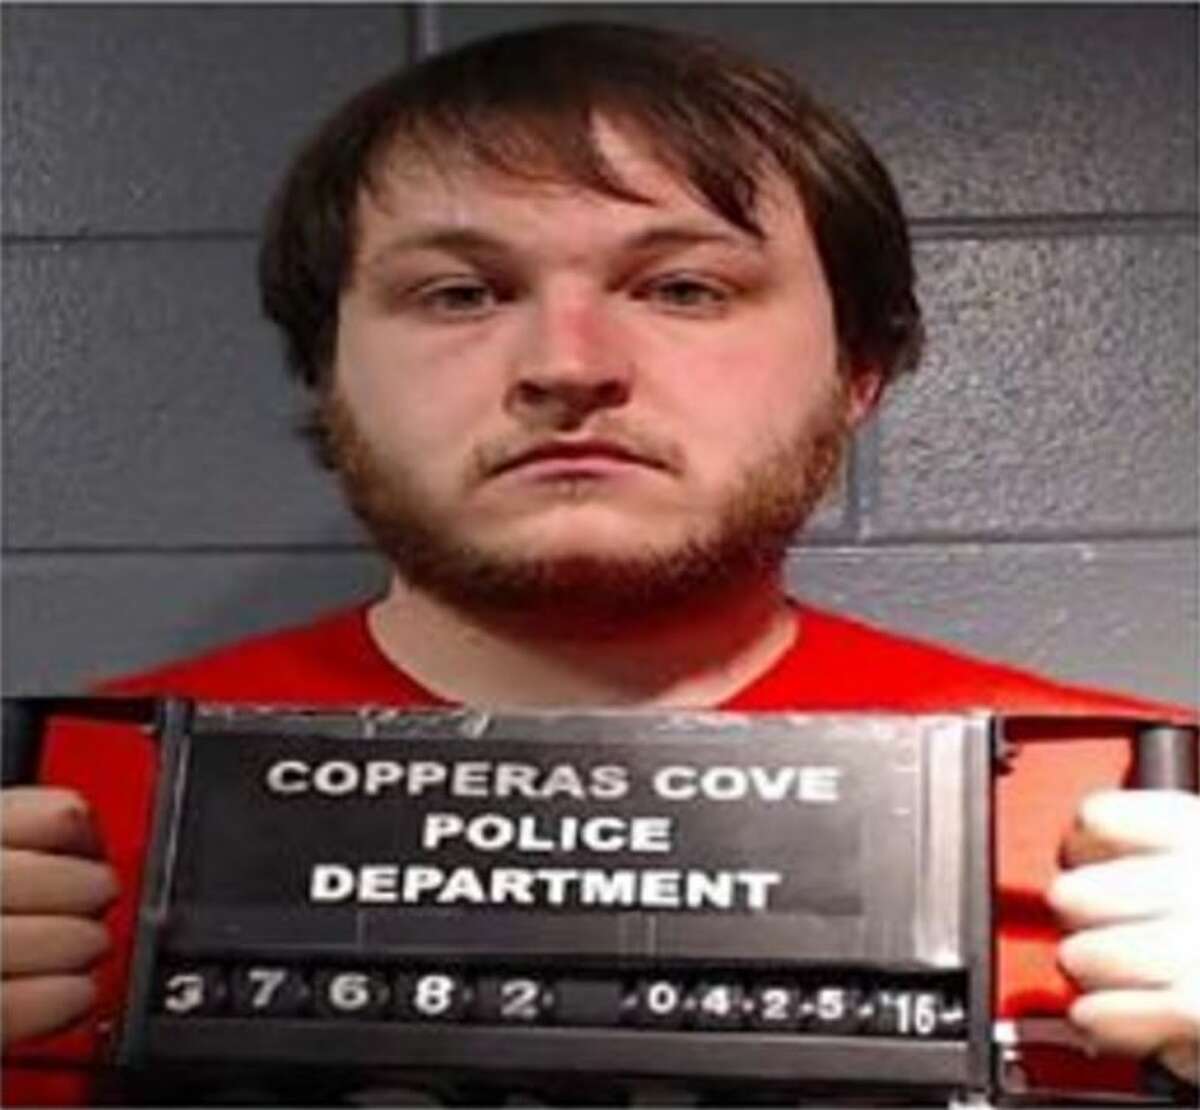 Brock Alan Monson, a 22-year-old China Springs man, was arrested April 25, 2016 during a sting conducted by the Texas Attorney General's Child Exploitation Unit and Copperas Cove Police Department. Monson has been charged with online solicitation of a minor and five counts of possession of child pornography.